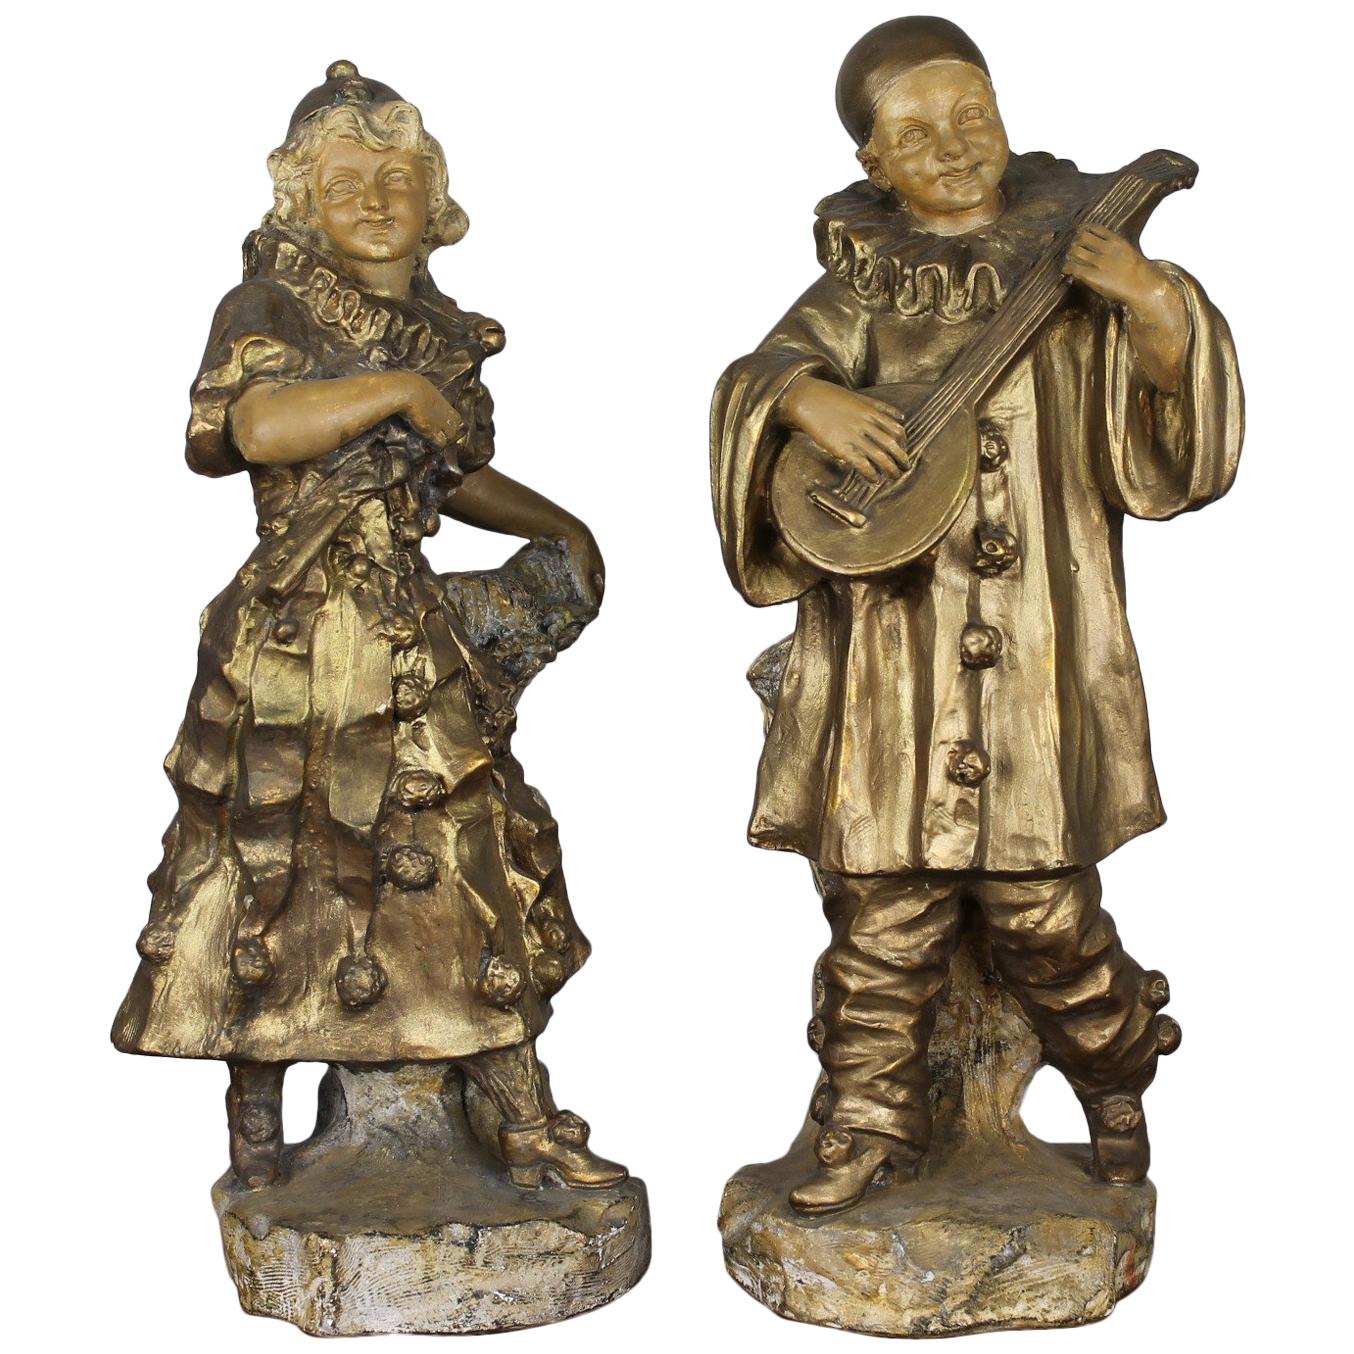 Pierrot - Colombine Patinated Plaster Vases, Sculptures Early 20th Century